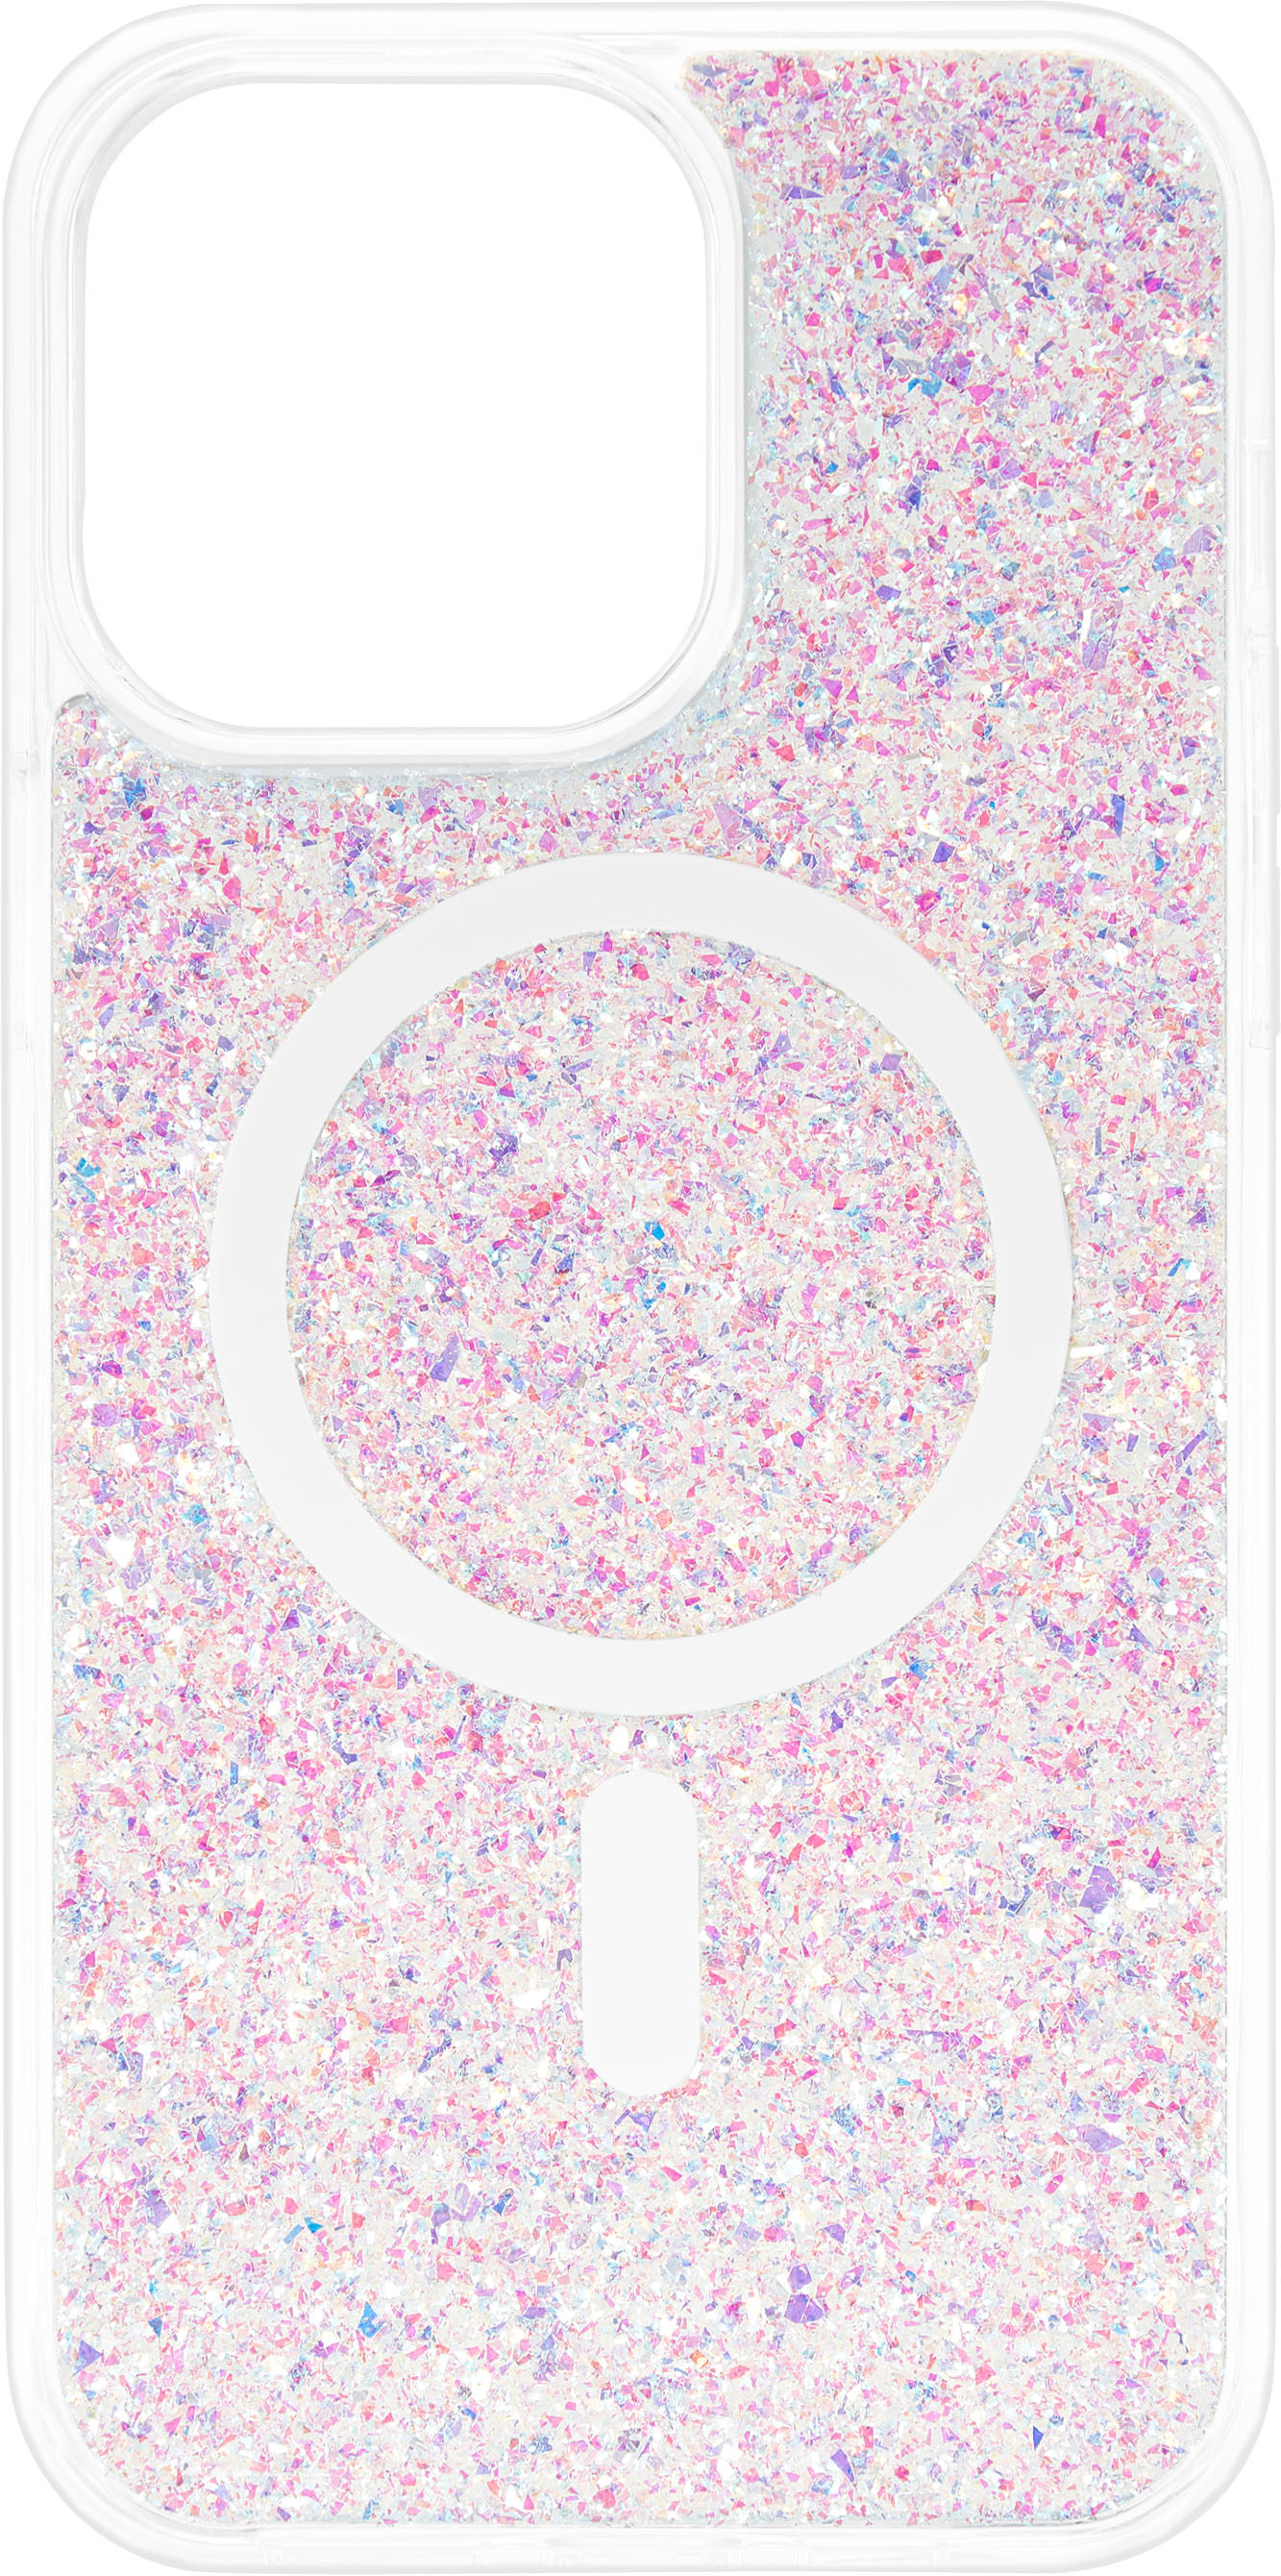 Insignia - Hard-Shell Case with MagSafe for iPhone 14 Pro Max - Pink Glitter